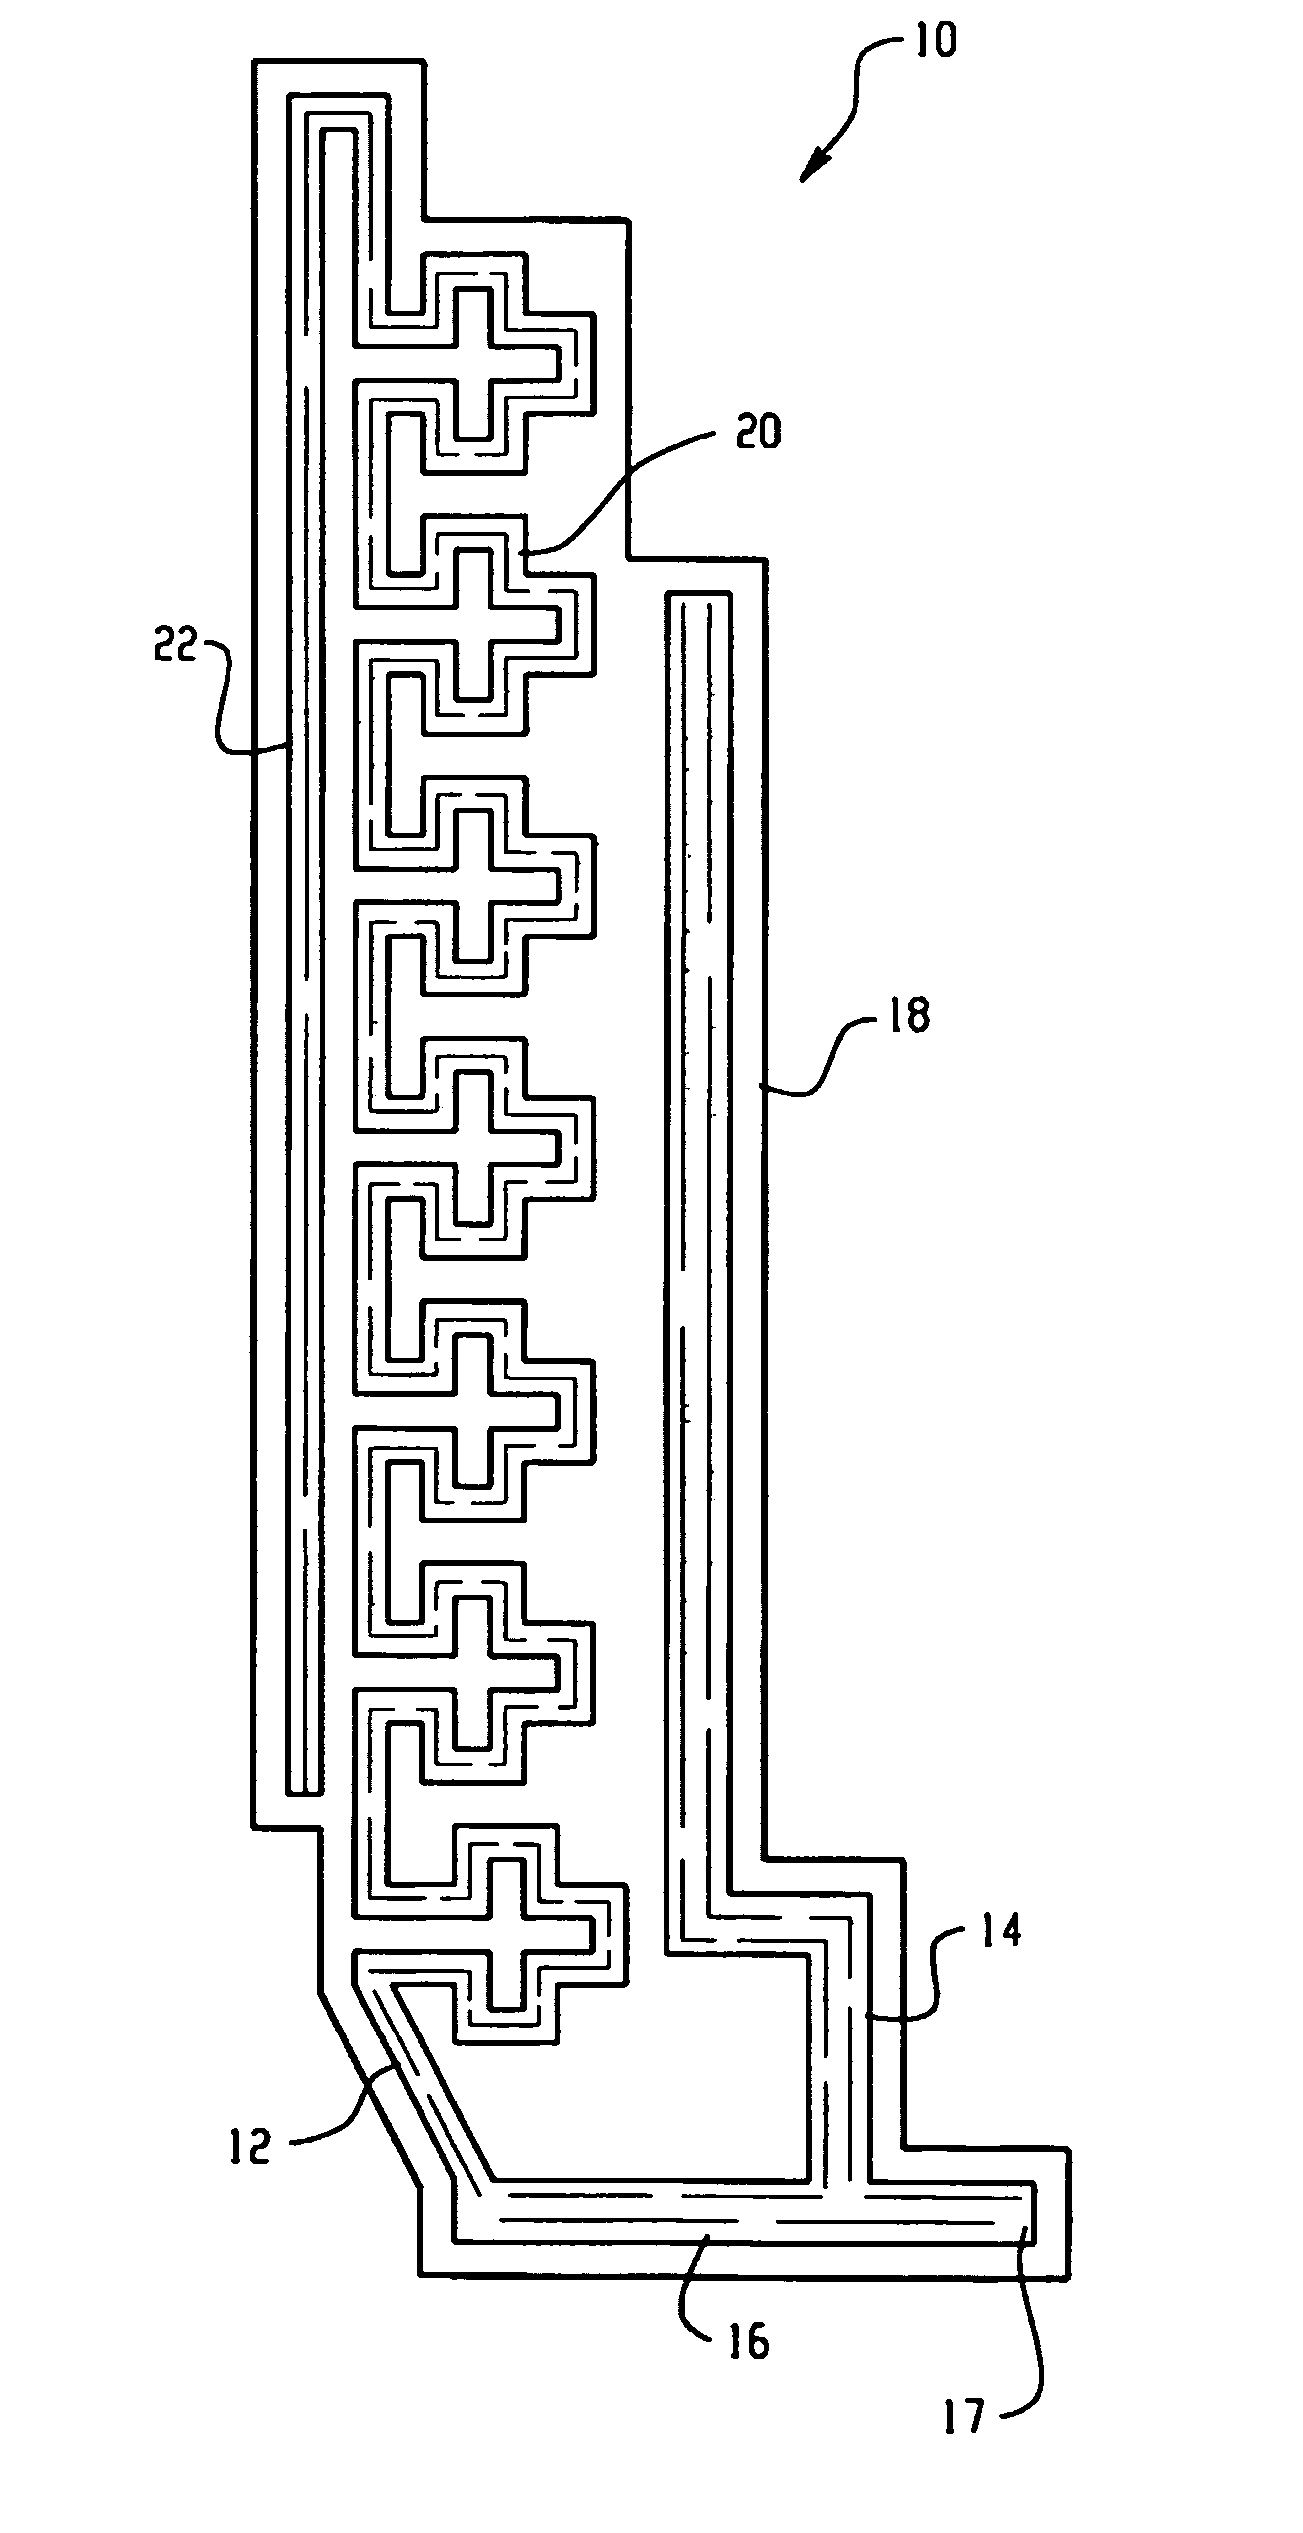 Multi-band monopole antennas for mobile communications devices